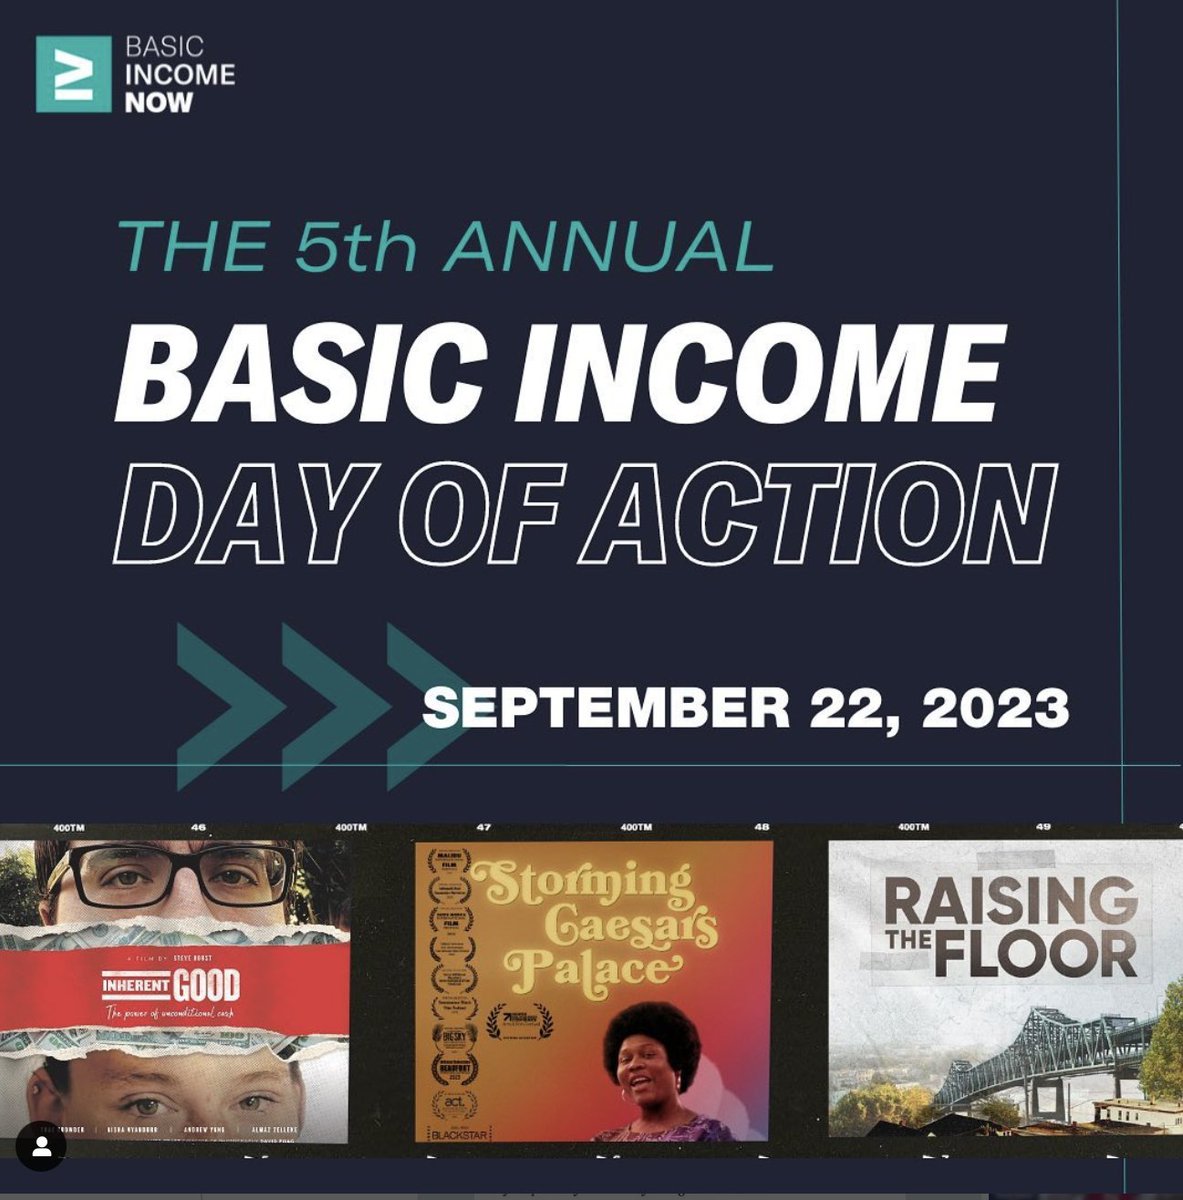 So proud to our participation in the 2023 Basic Income Day of Action! Thank you to all the organizers who worked hard to bring RAISING THE FLOOR to their communities to raise awareness, inspire & invigorate the movement. And to the Income Movement team for including us! 🙌 🎥